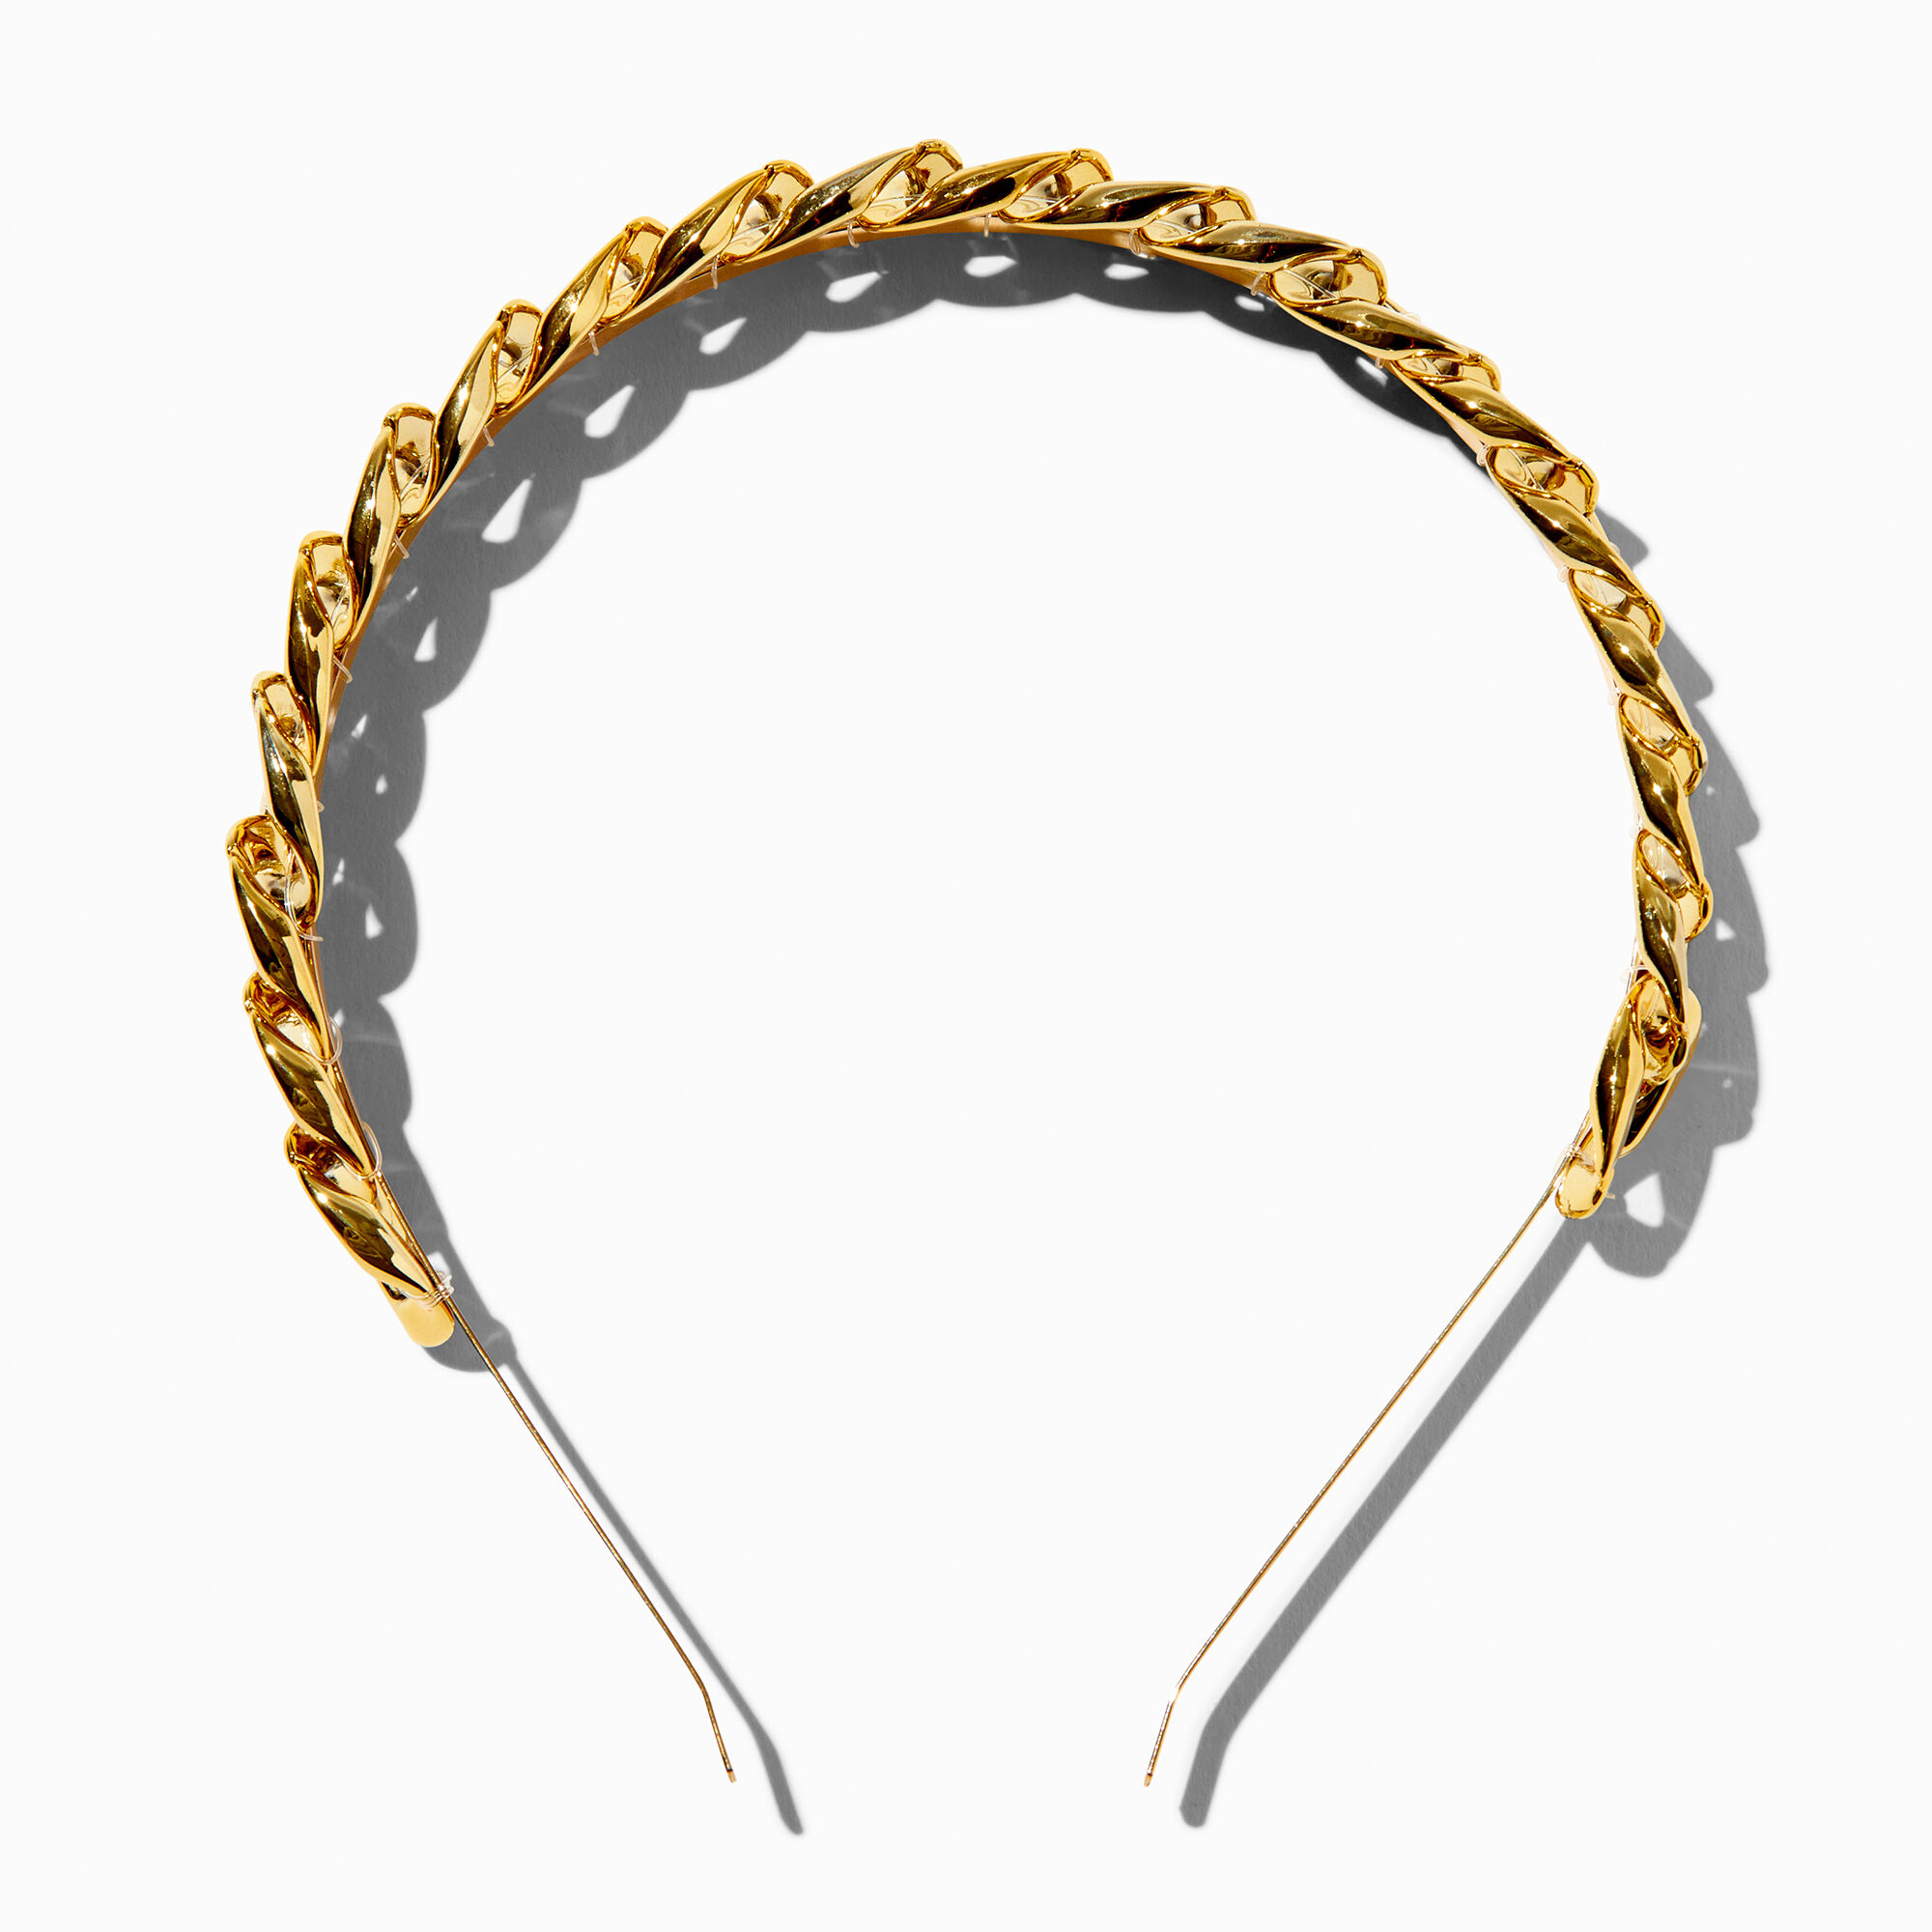 View Claires Chain Metal Headband Gold information